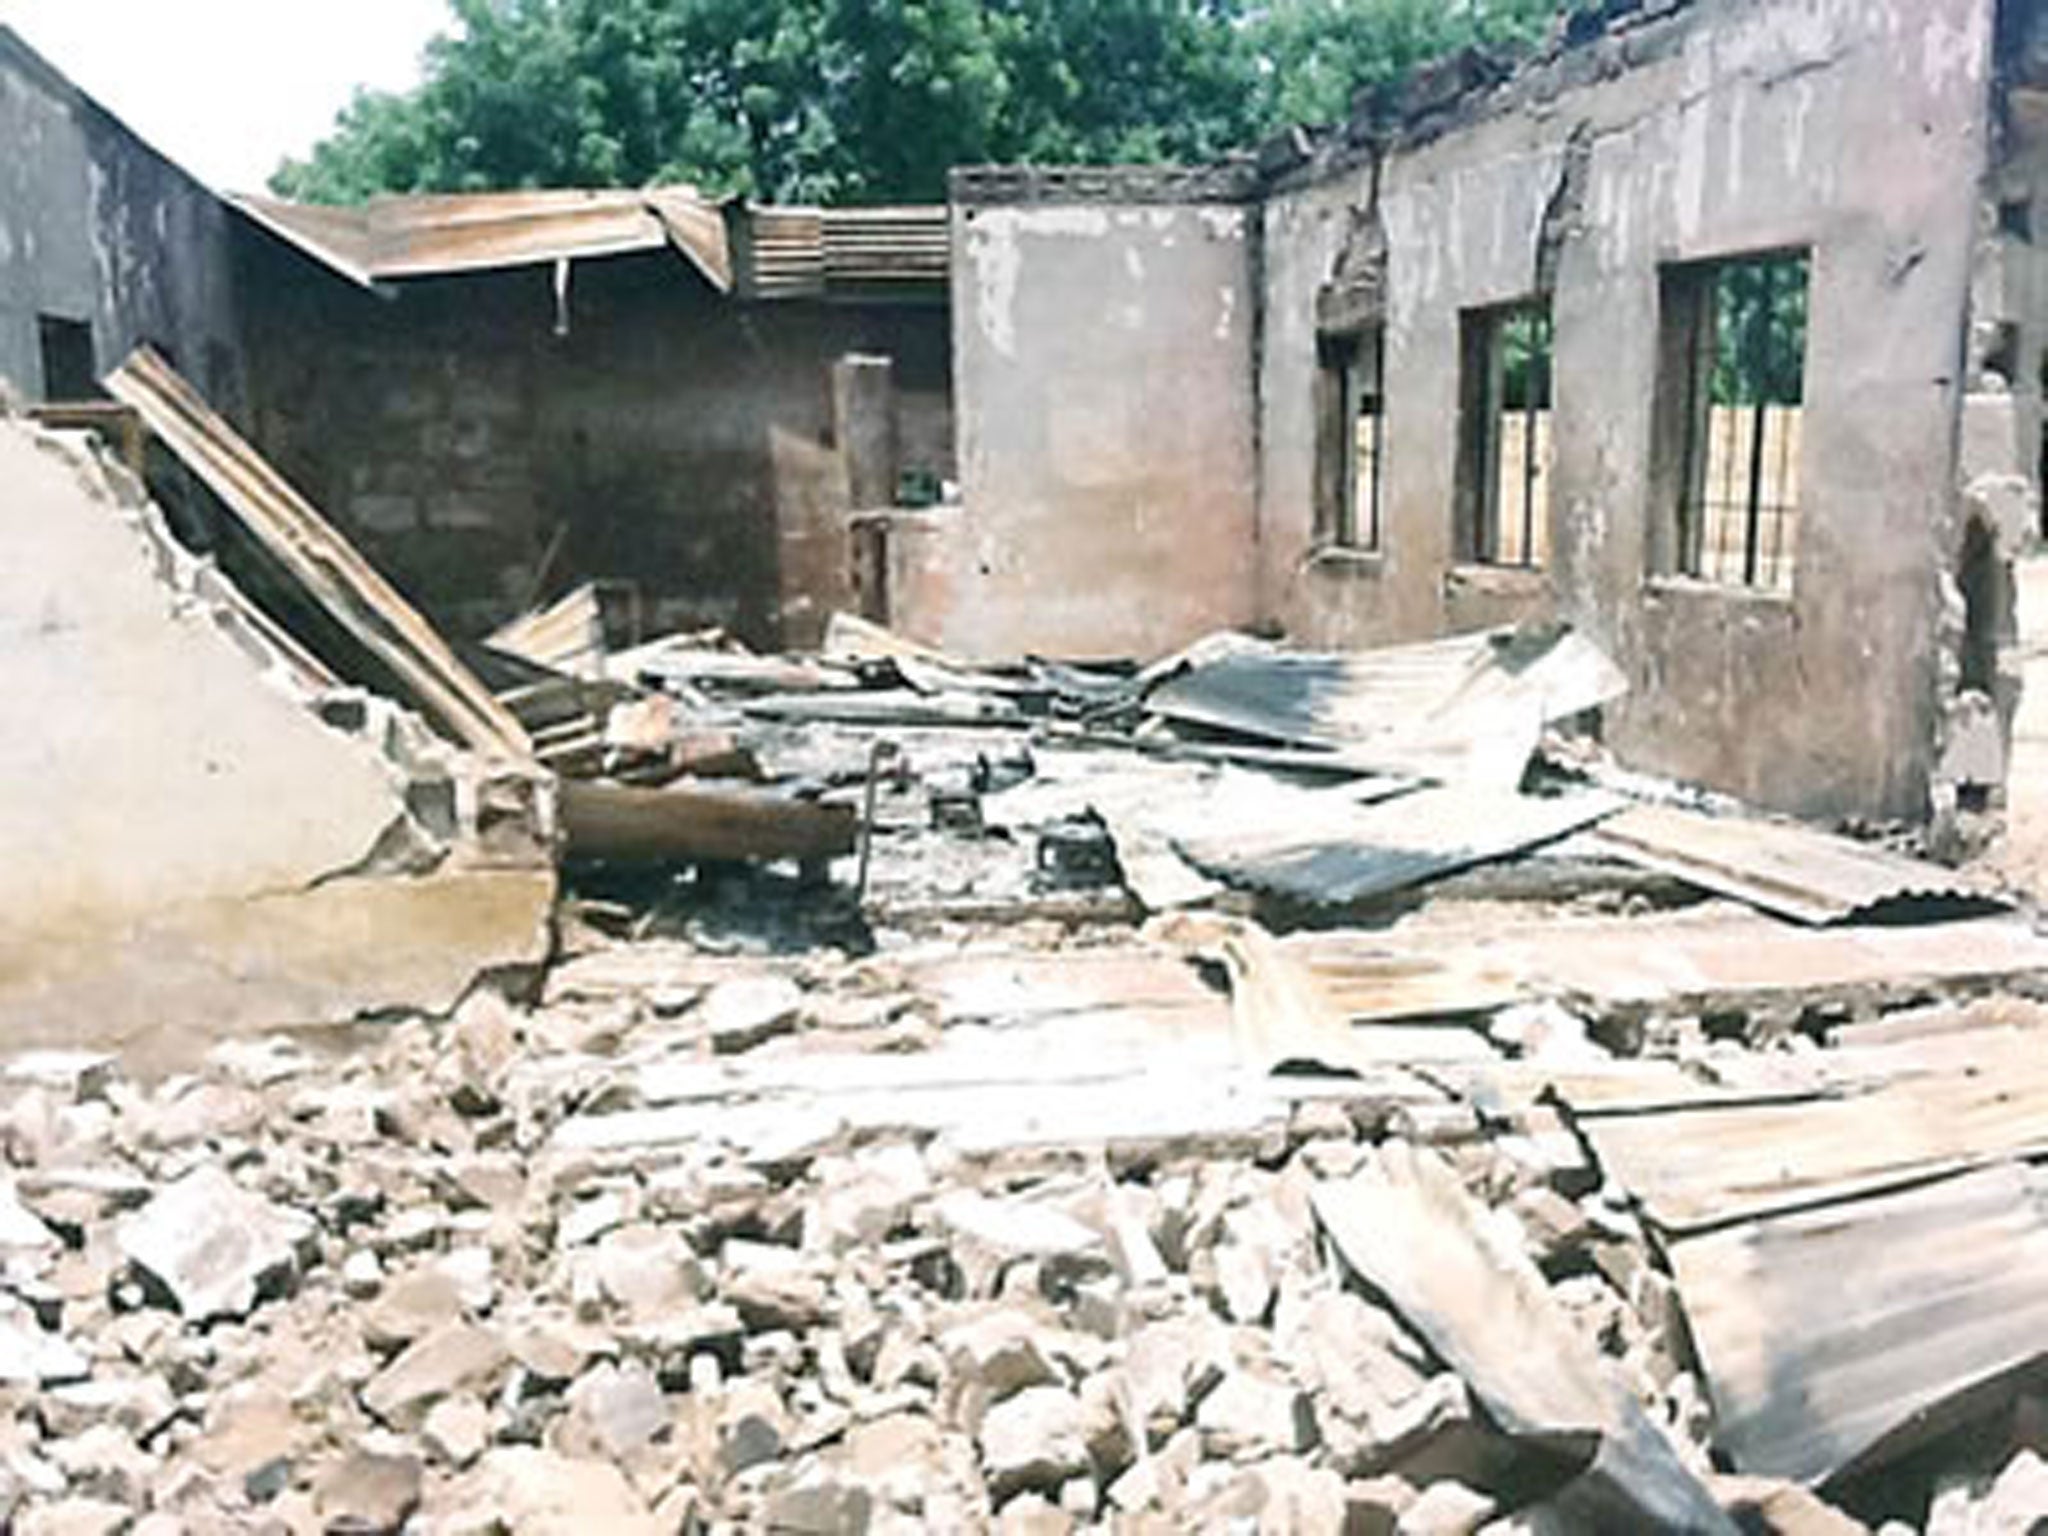 During the assault, Boko Haram Islamists marched students and staff into a dormitory, throwing explosive devices into the room with them. They then opened fire on the building and set it alight.